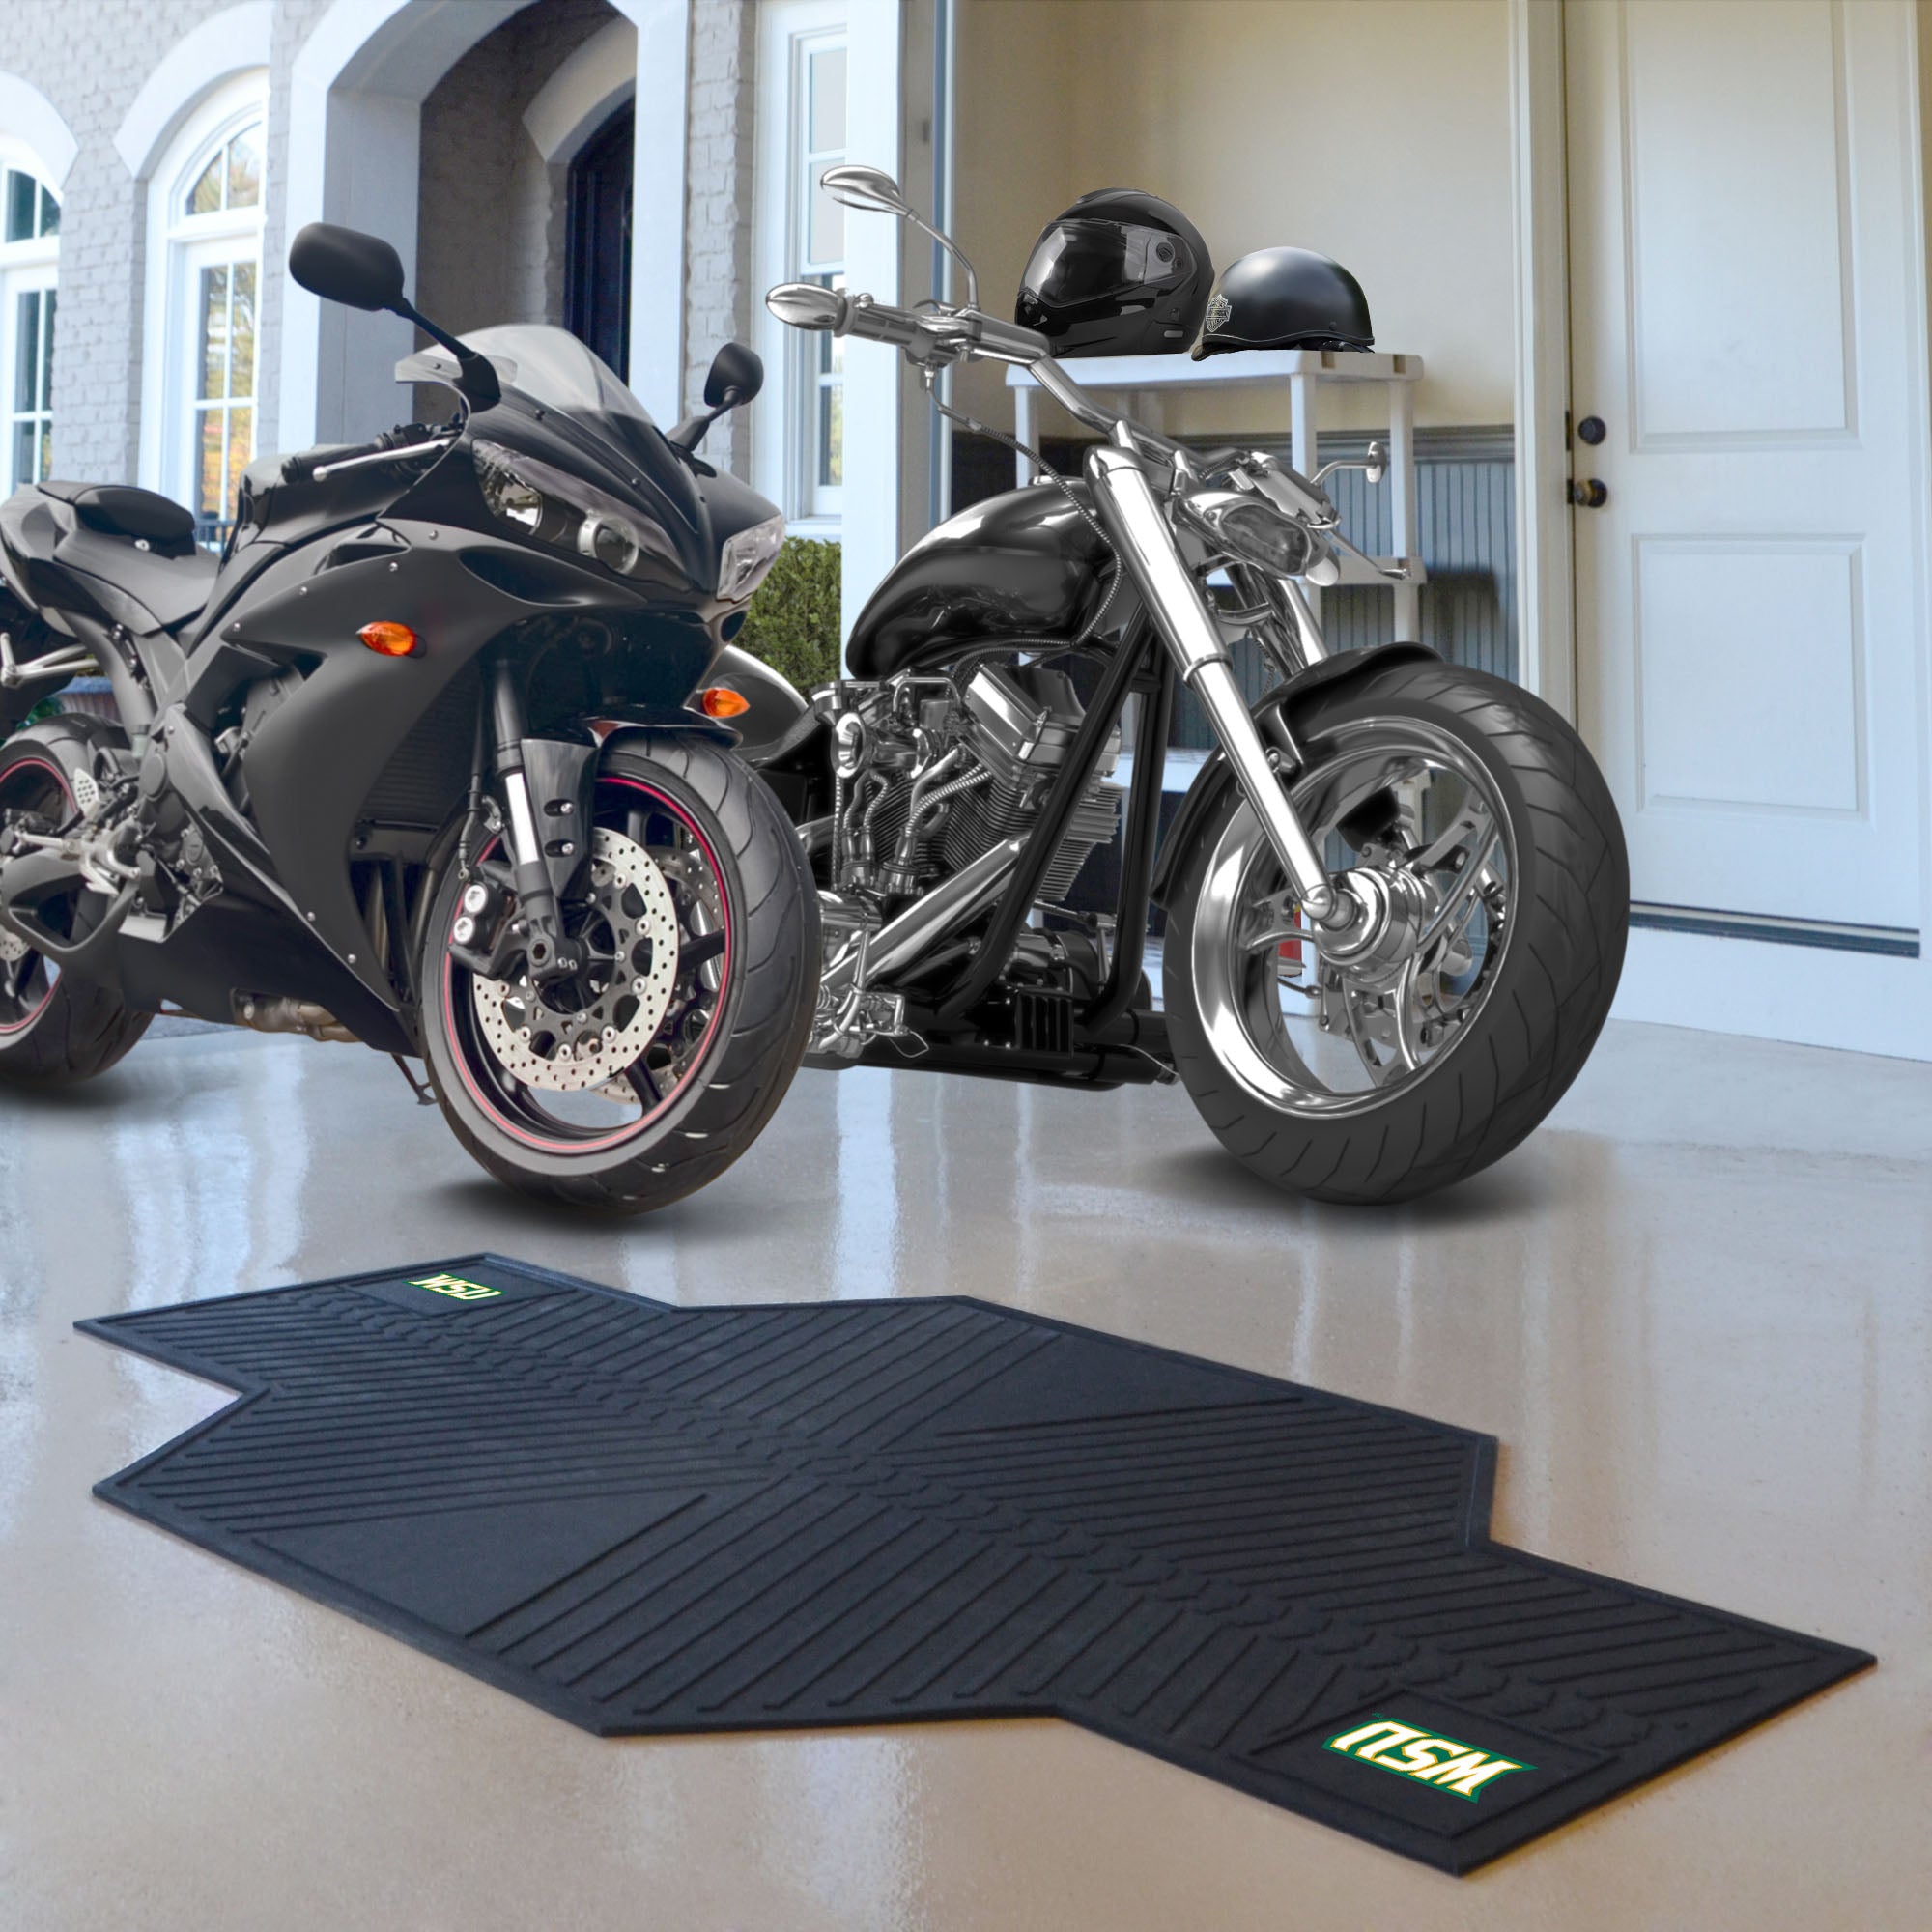 Wright State Raiders Motorcycle Mat